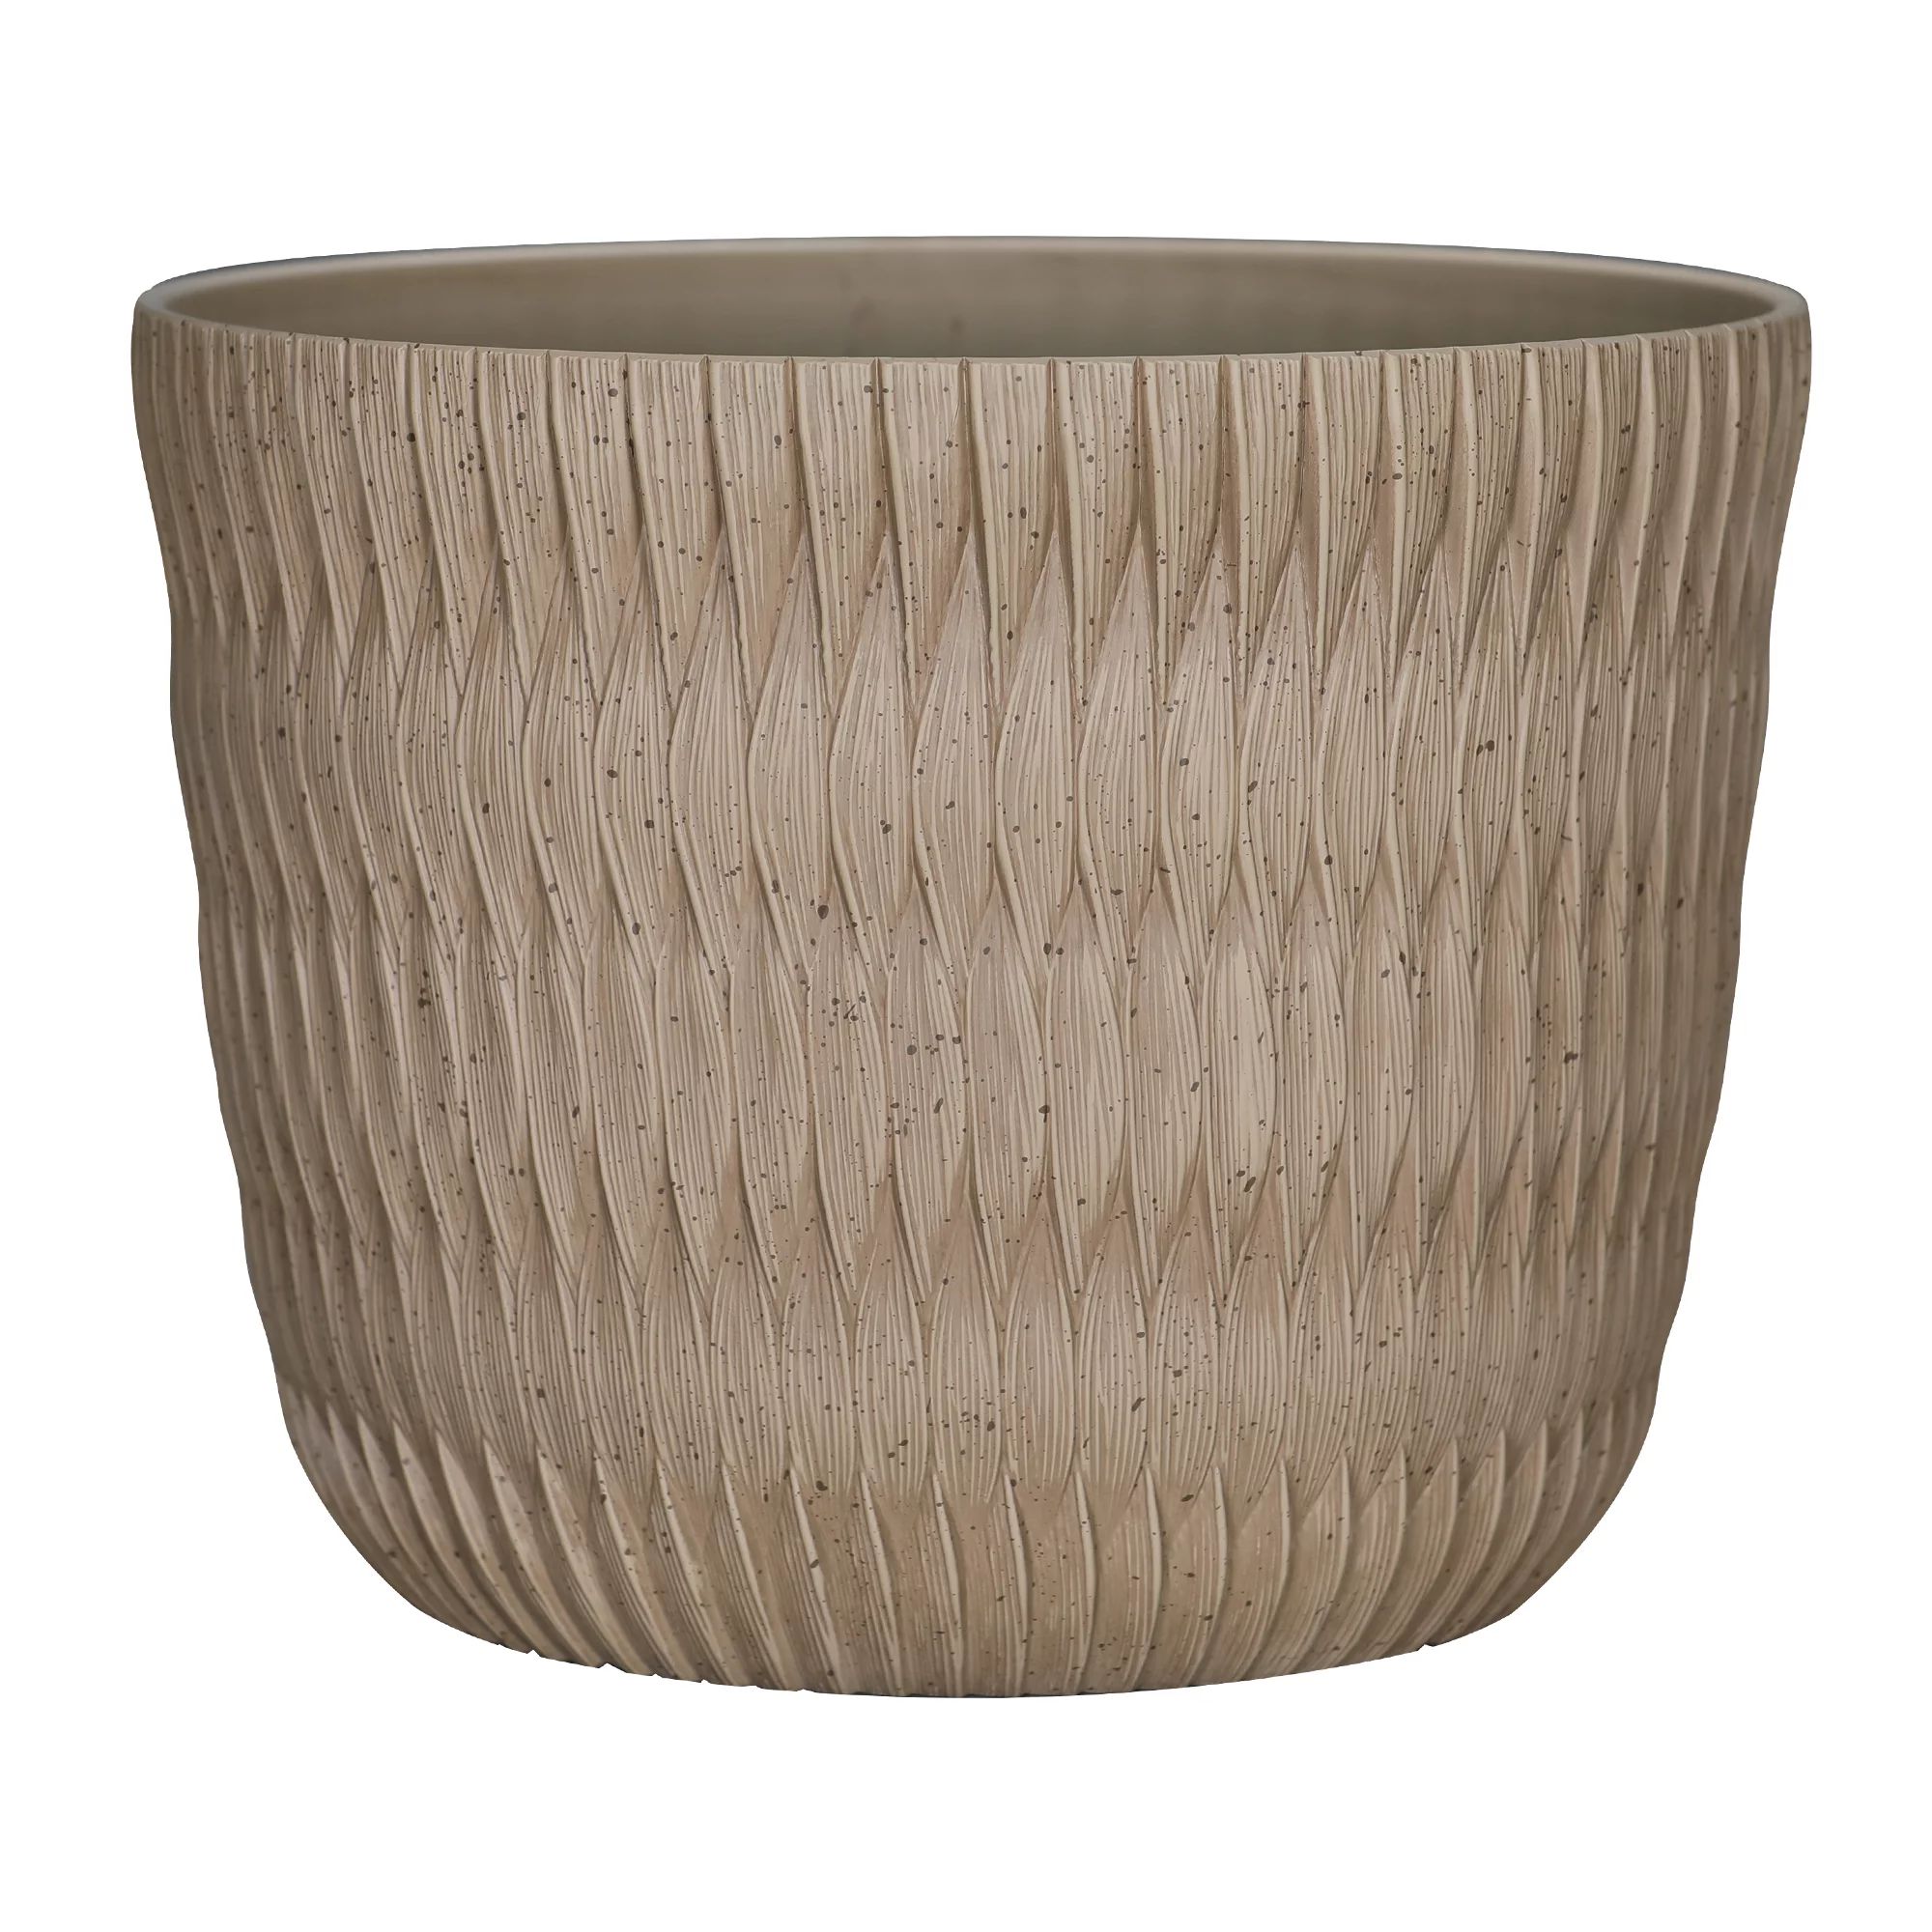 Better Homes & Gardens Carly Brown Resin Planter, 15.9in x 15.9in x 12.5in | Walmart (US)